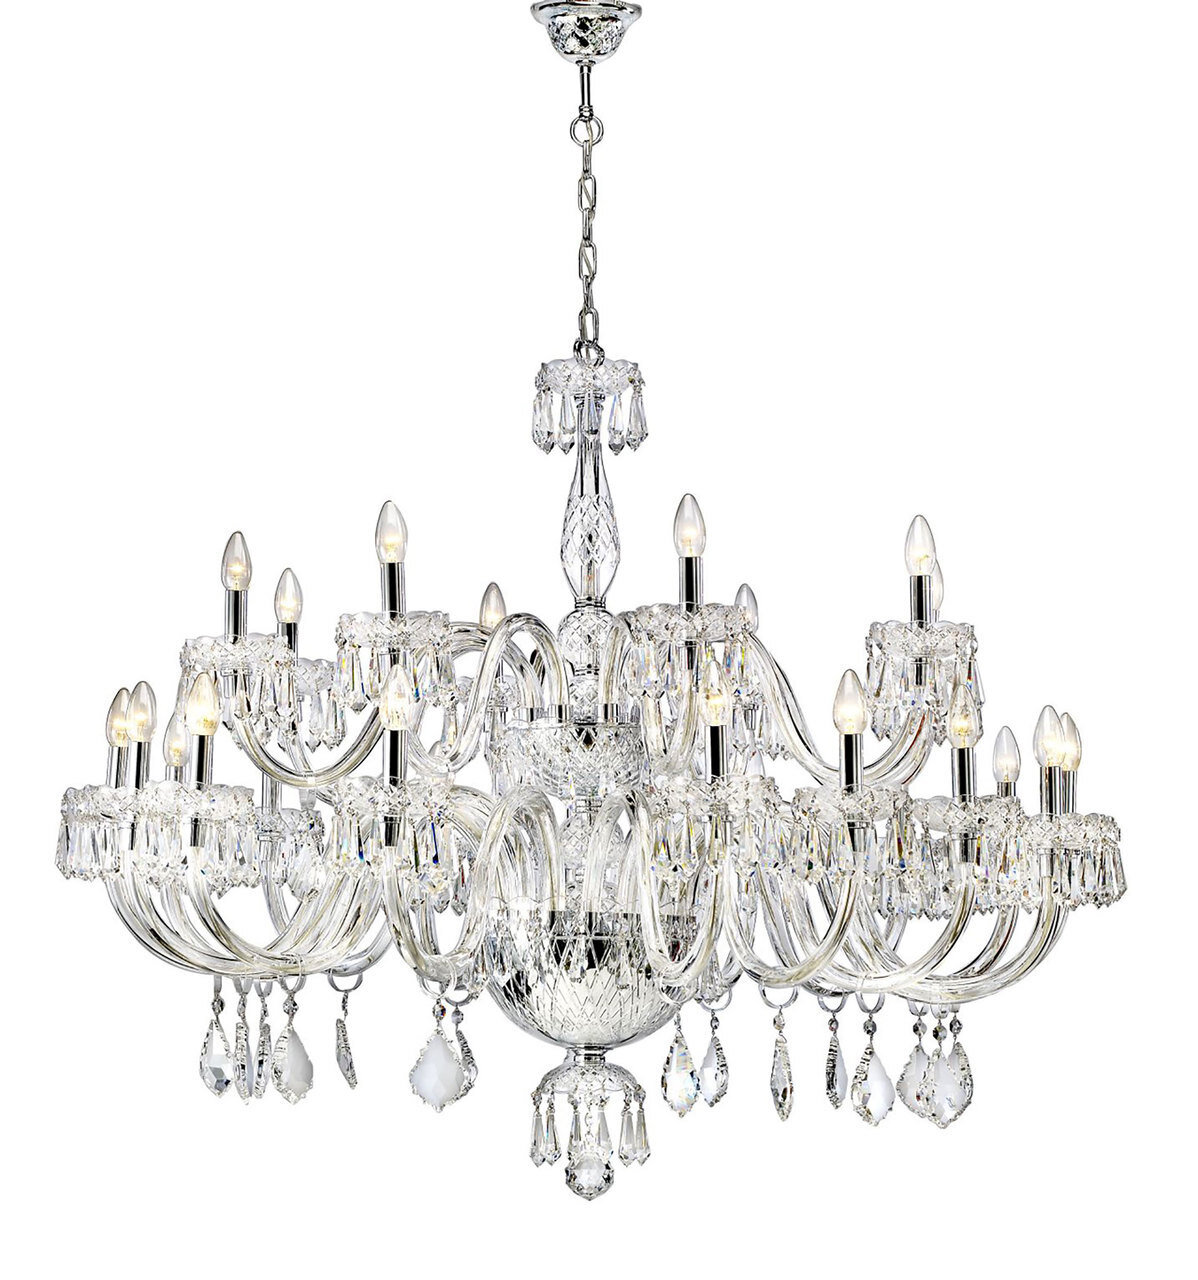 Vista Alegre Diamond Chandelier With 2 Levels And 24 Arms 48000371